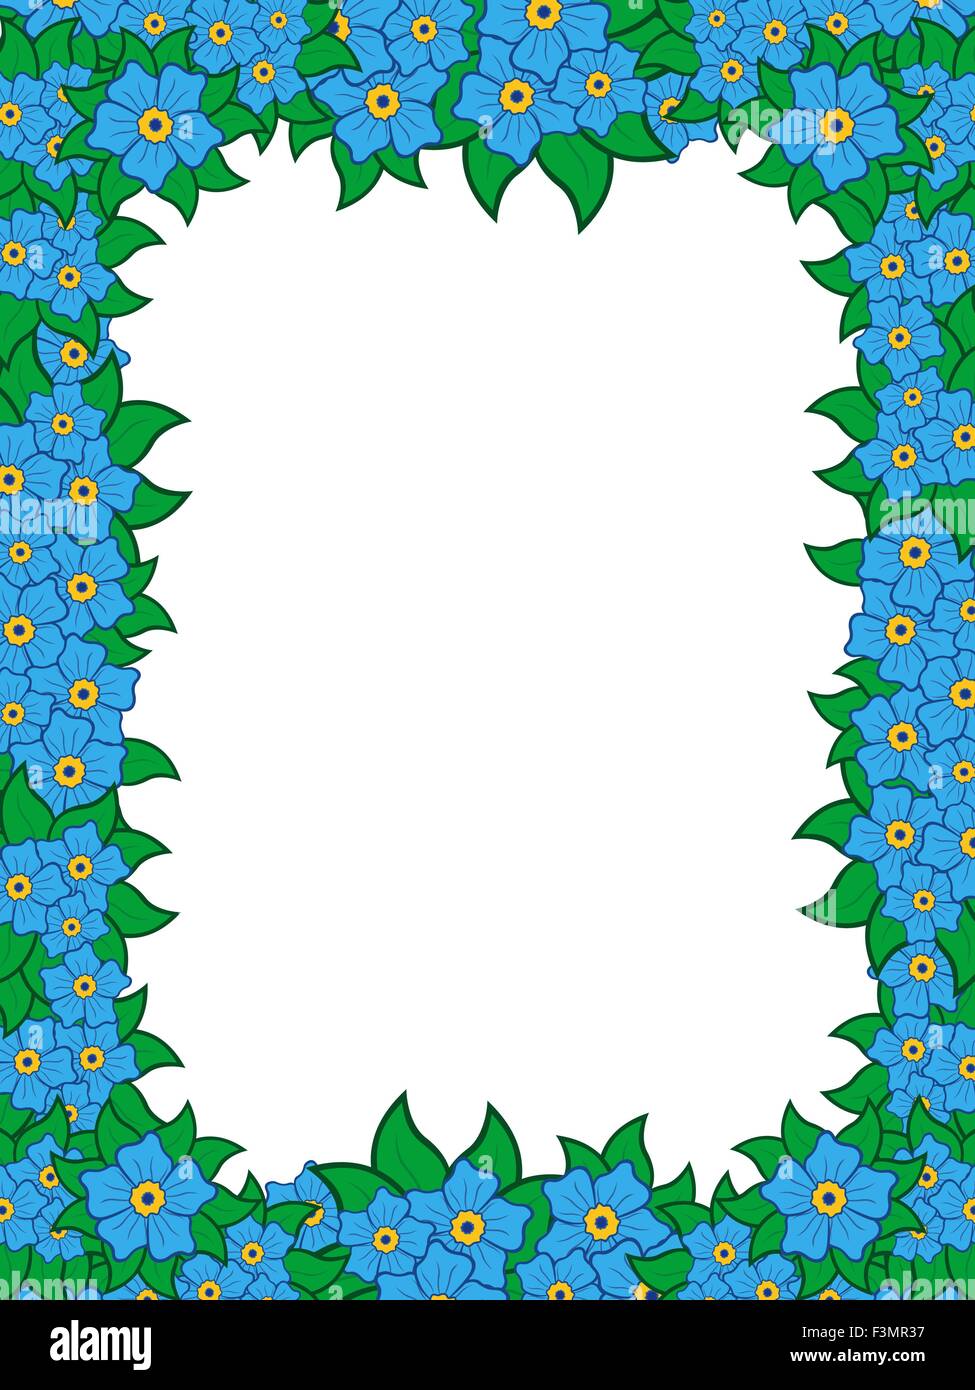 Frame with blue flowers around white background, hand drawing vector illustration Stock Vector